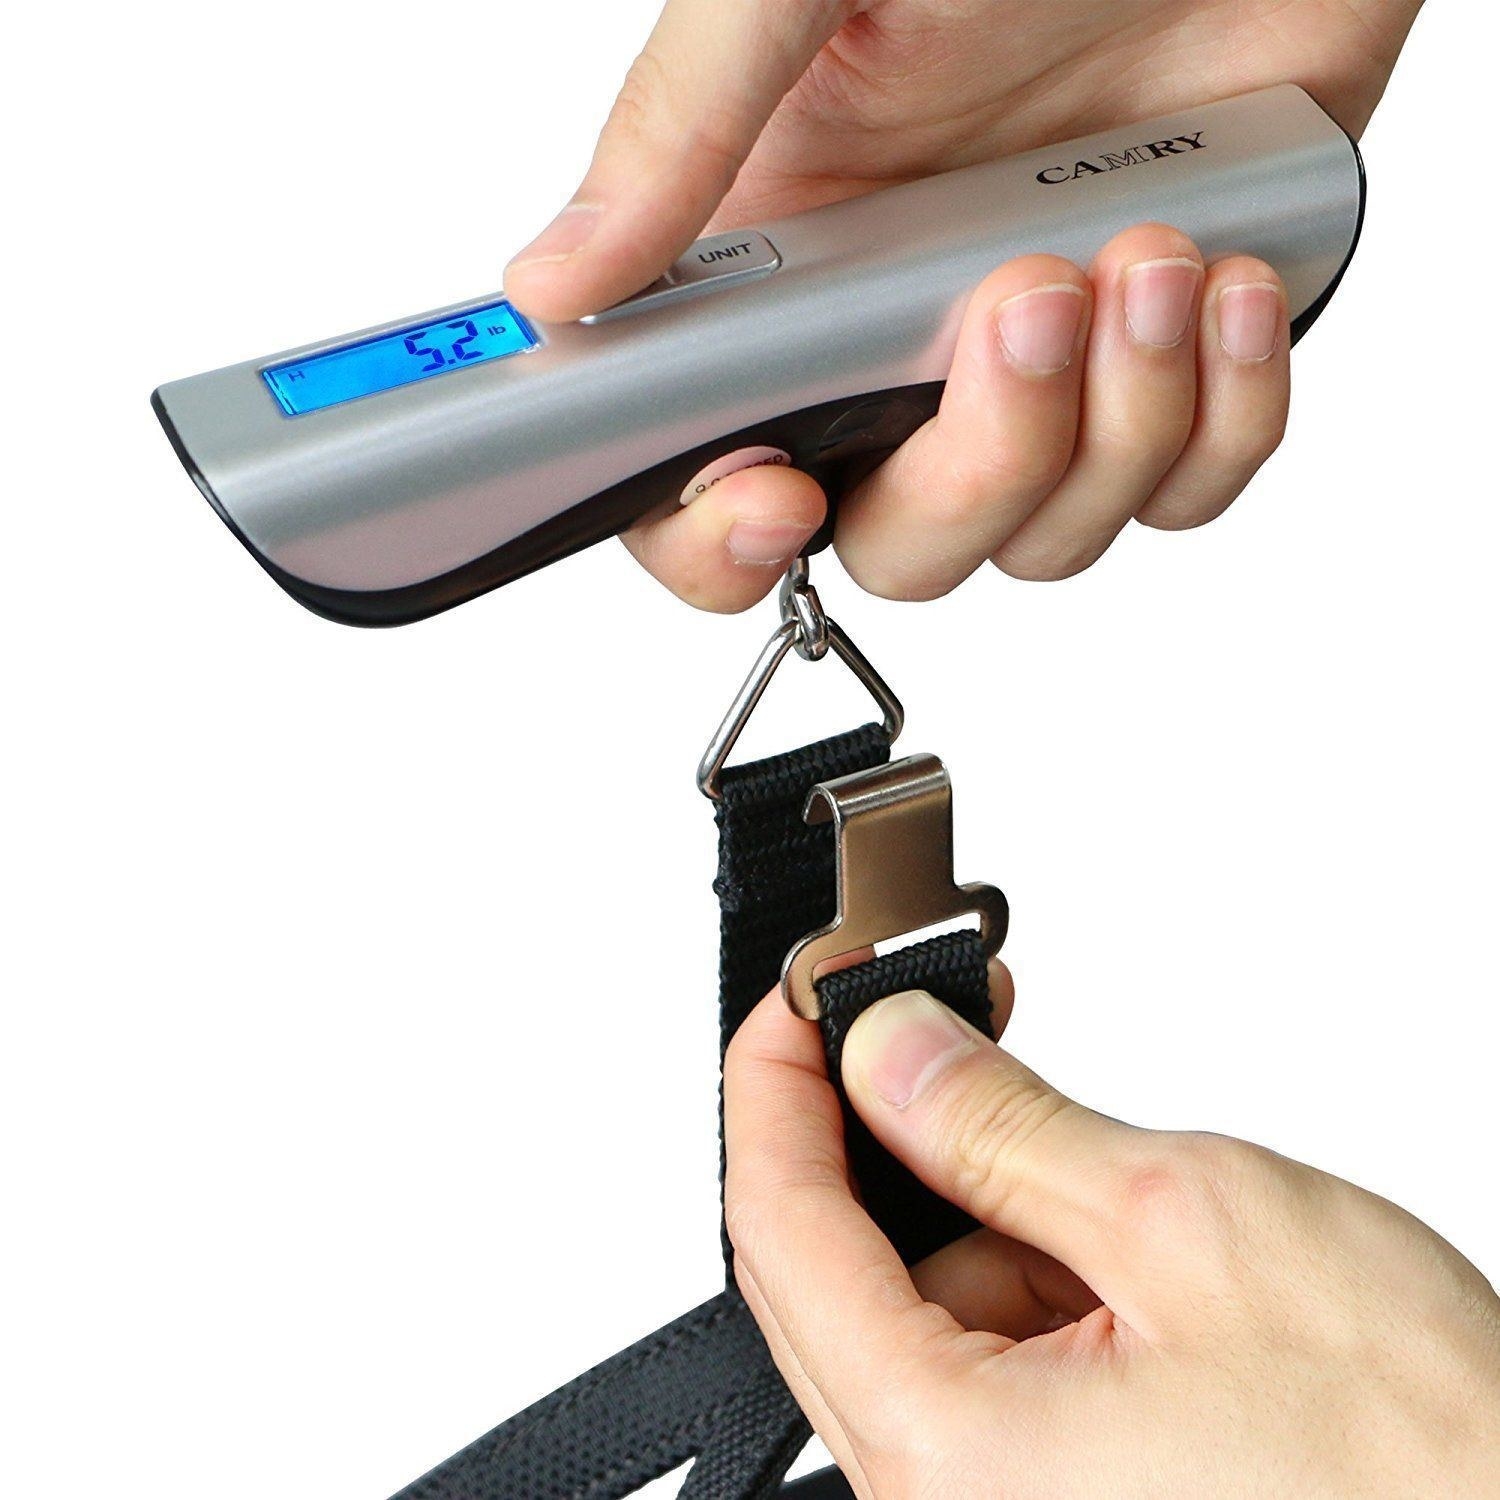 Model's hand holding the digital scale